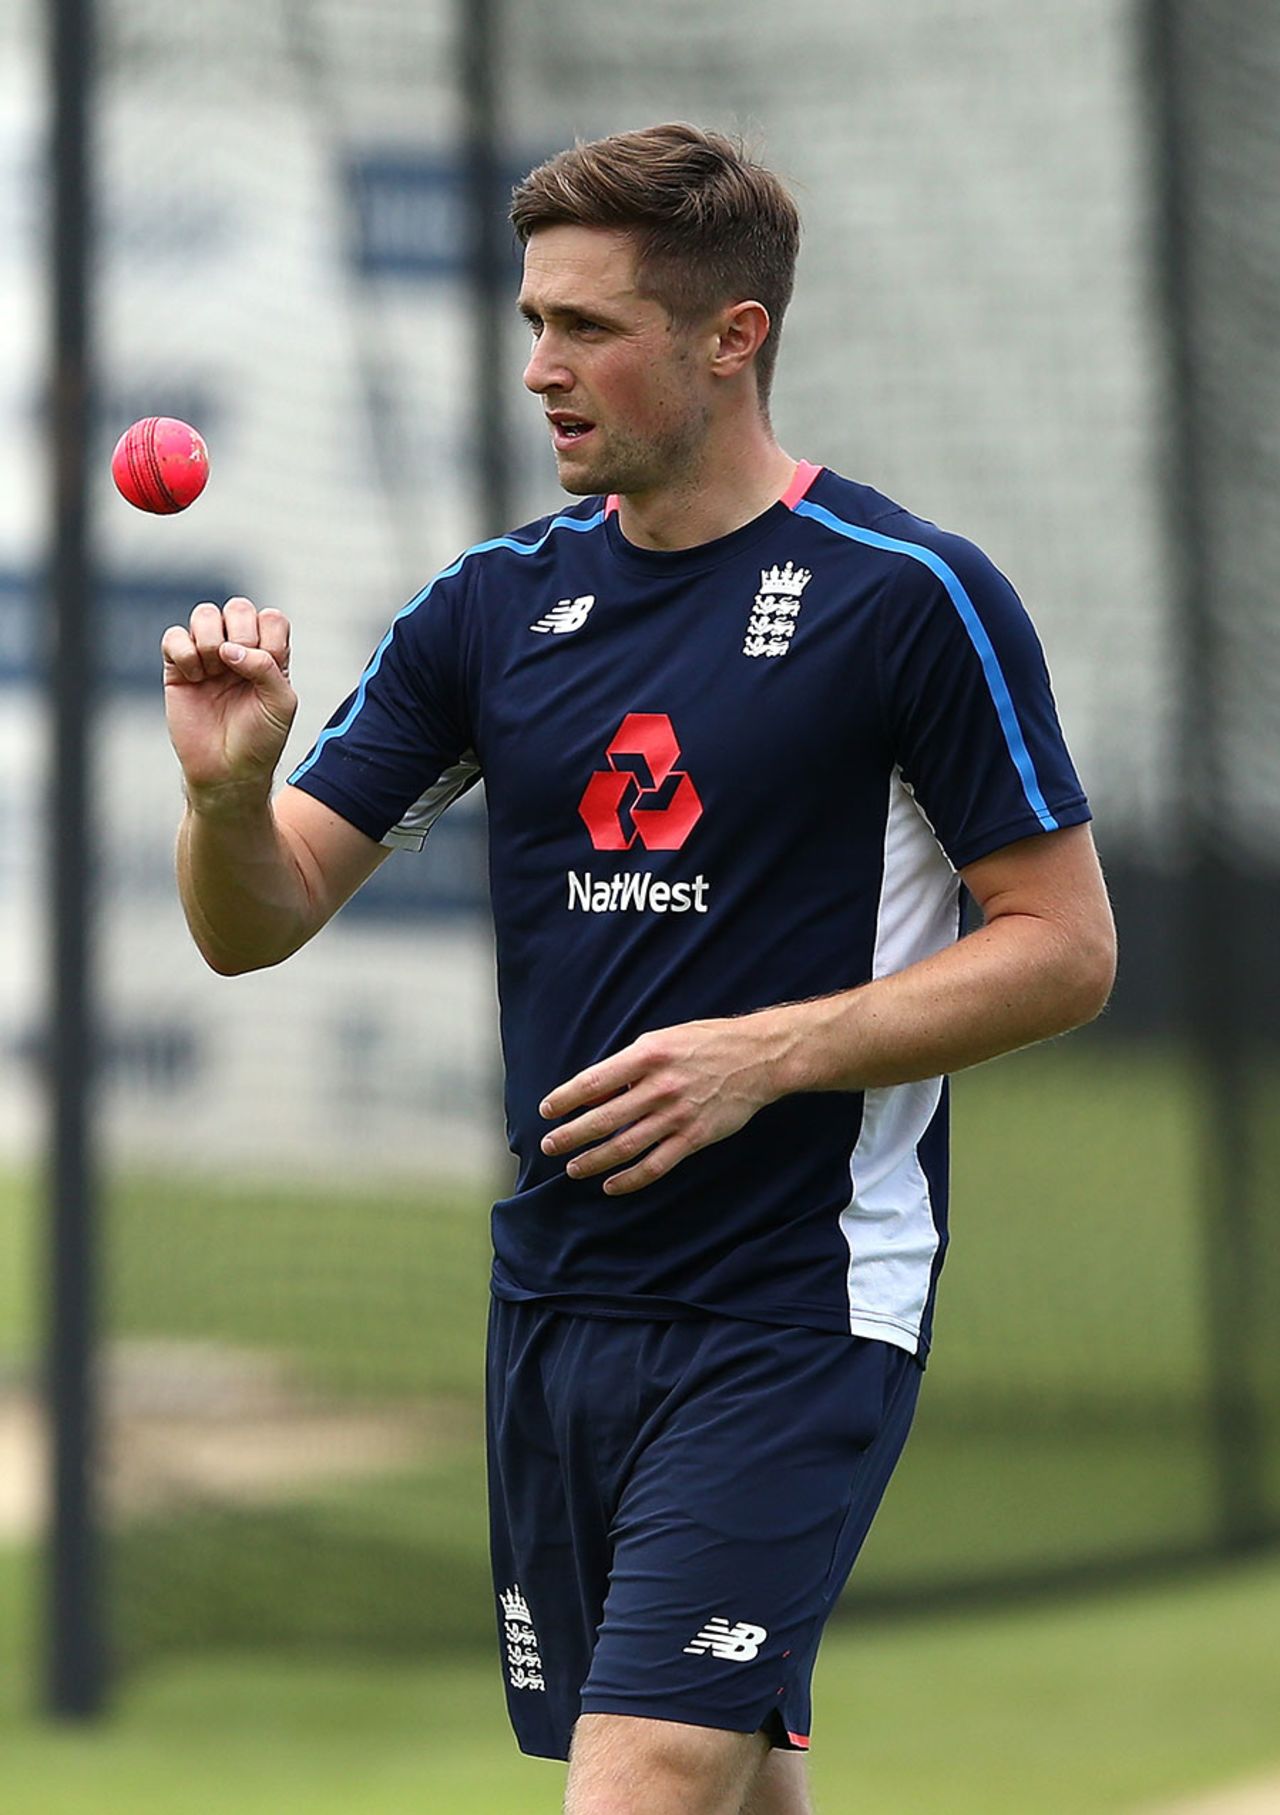 Chris Woakes is hoping to earn a recall after injury, Edgbaston, August 15, 2017